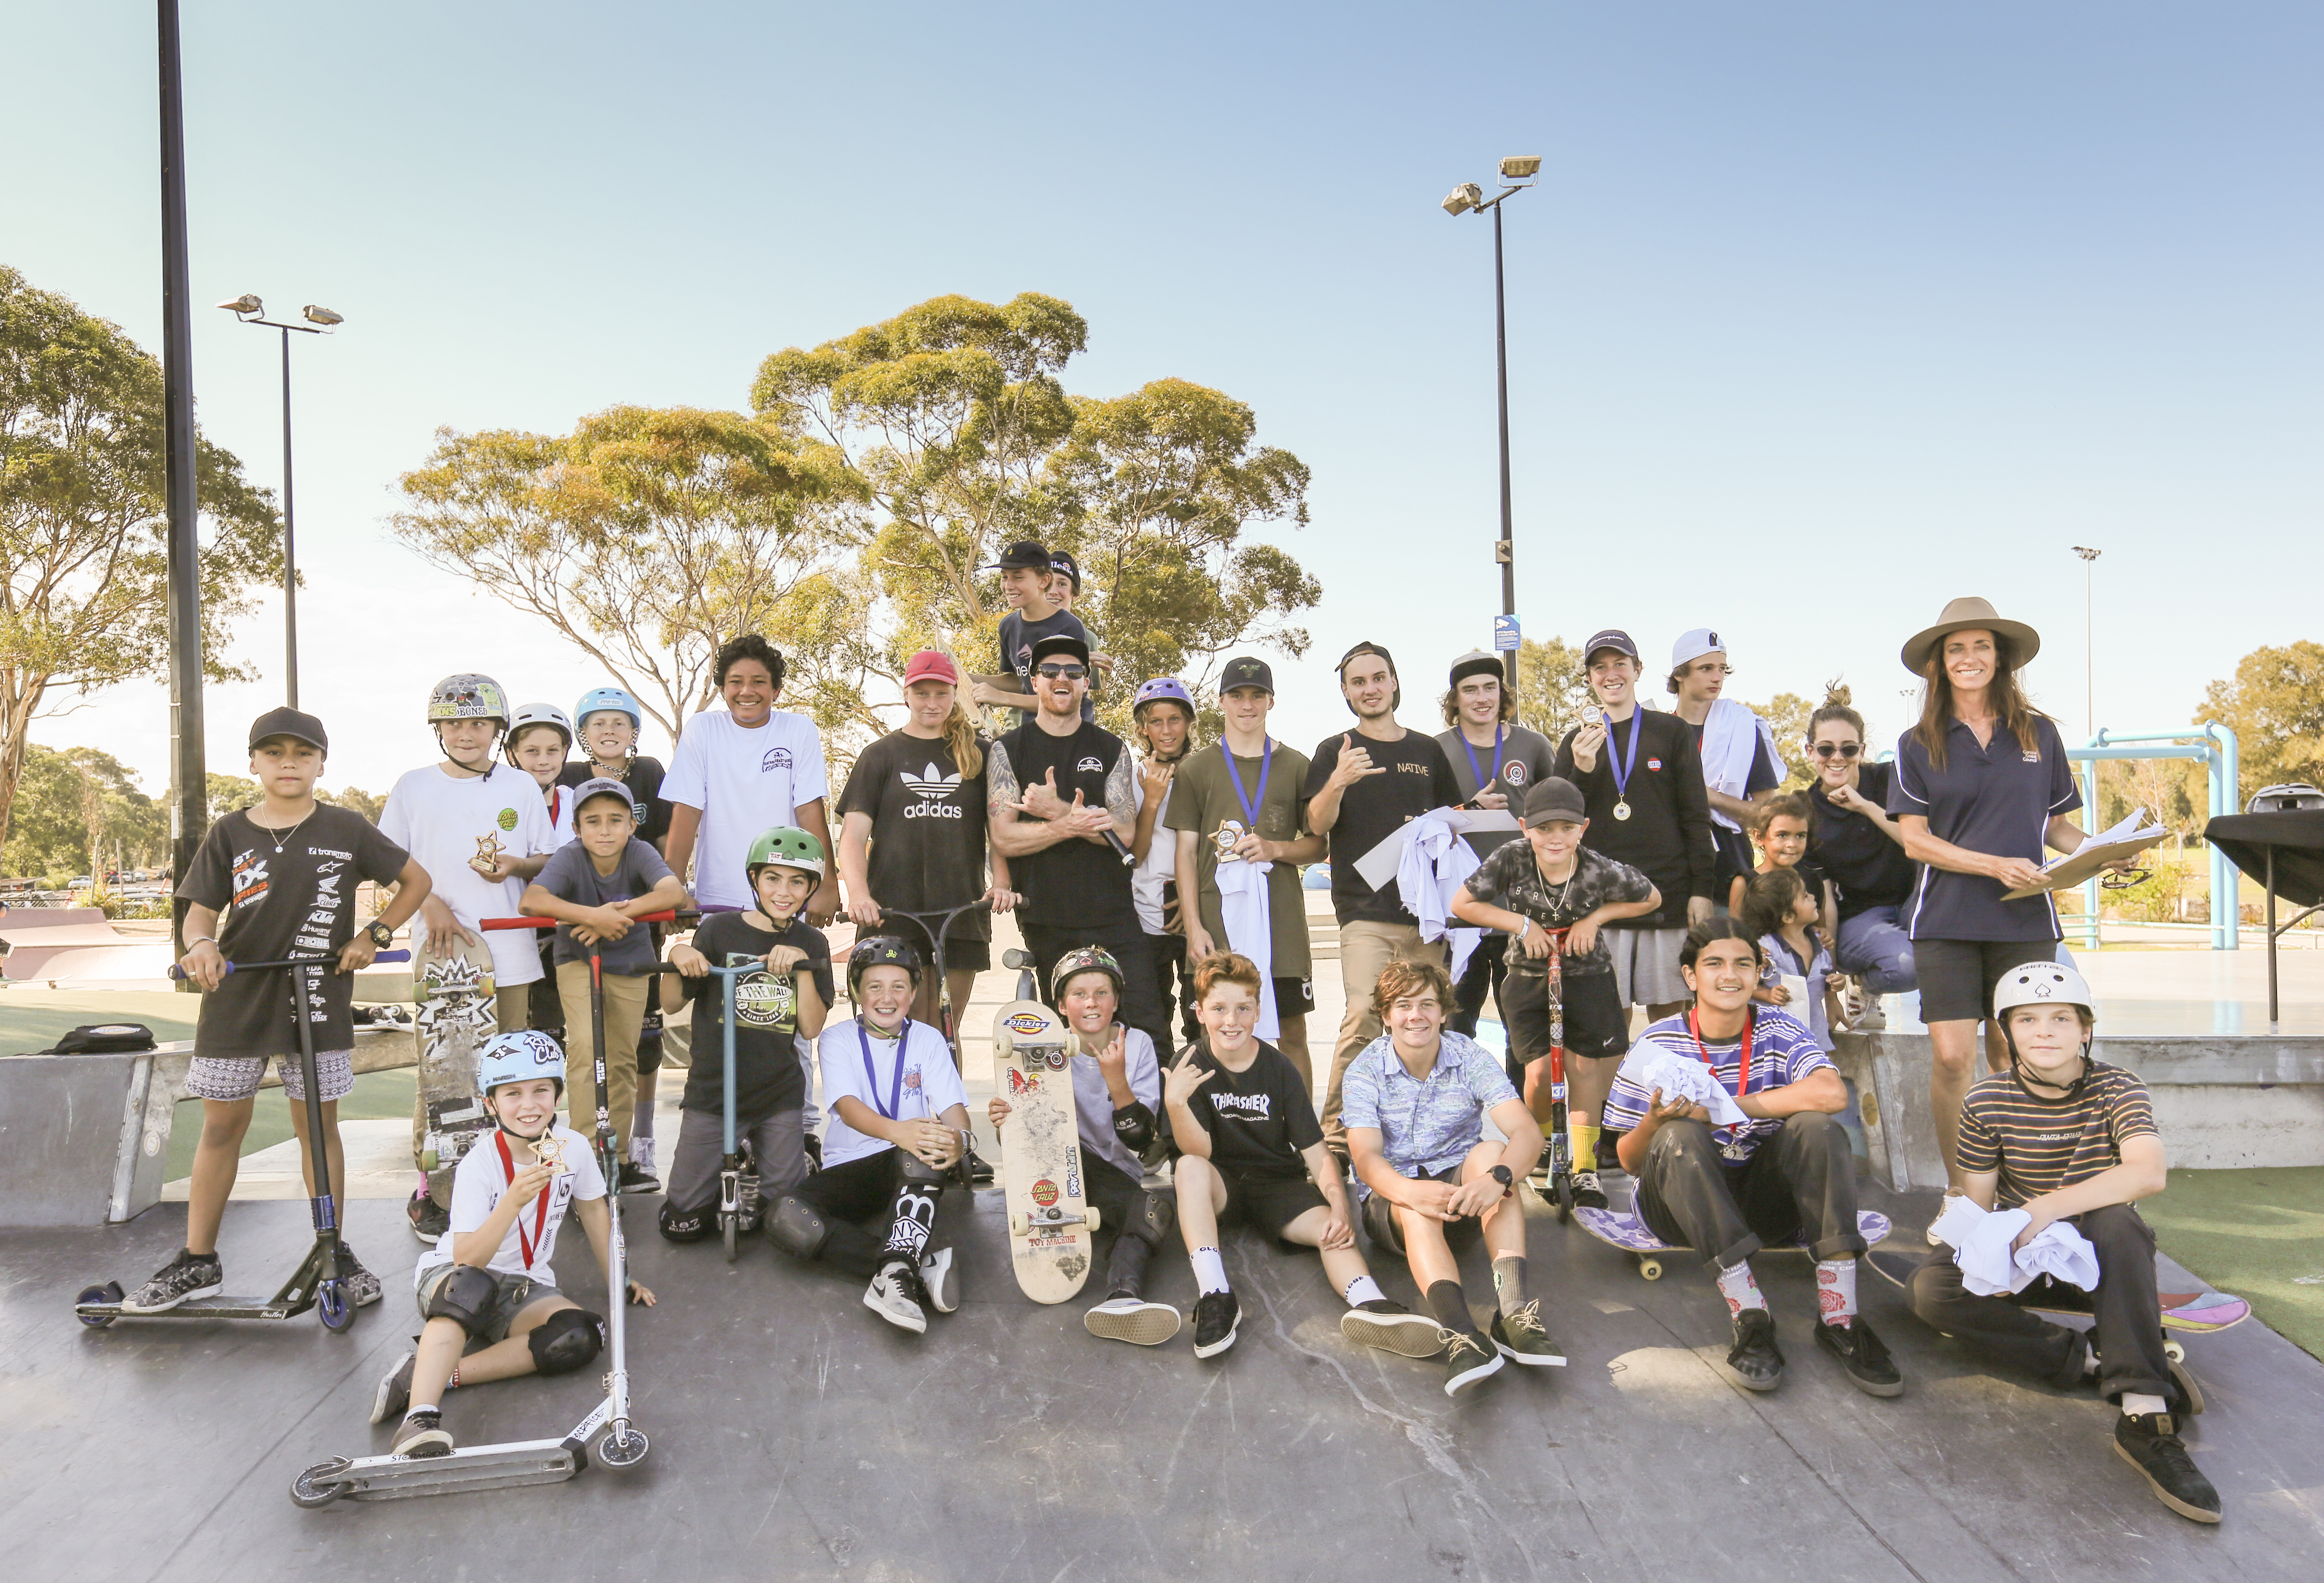 central coast series, skate and scooter comp, bato yard